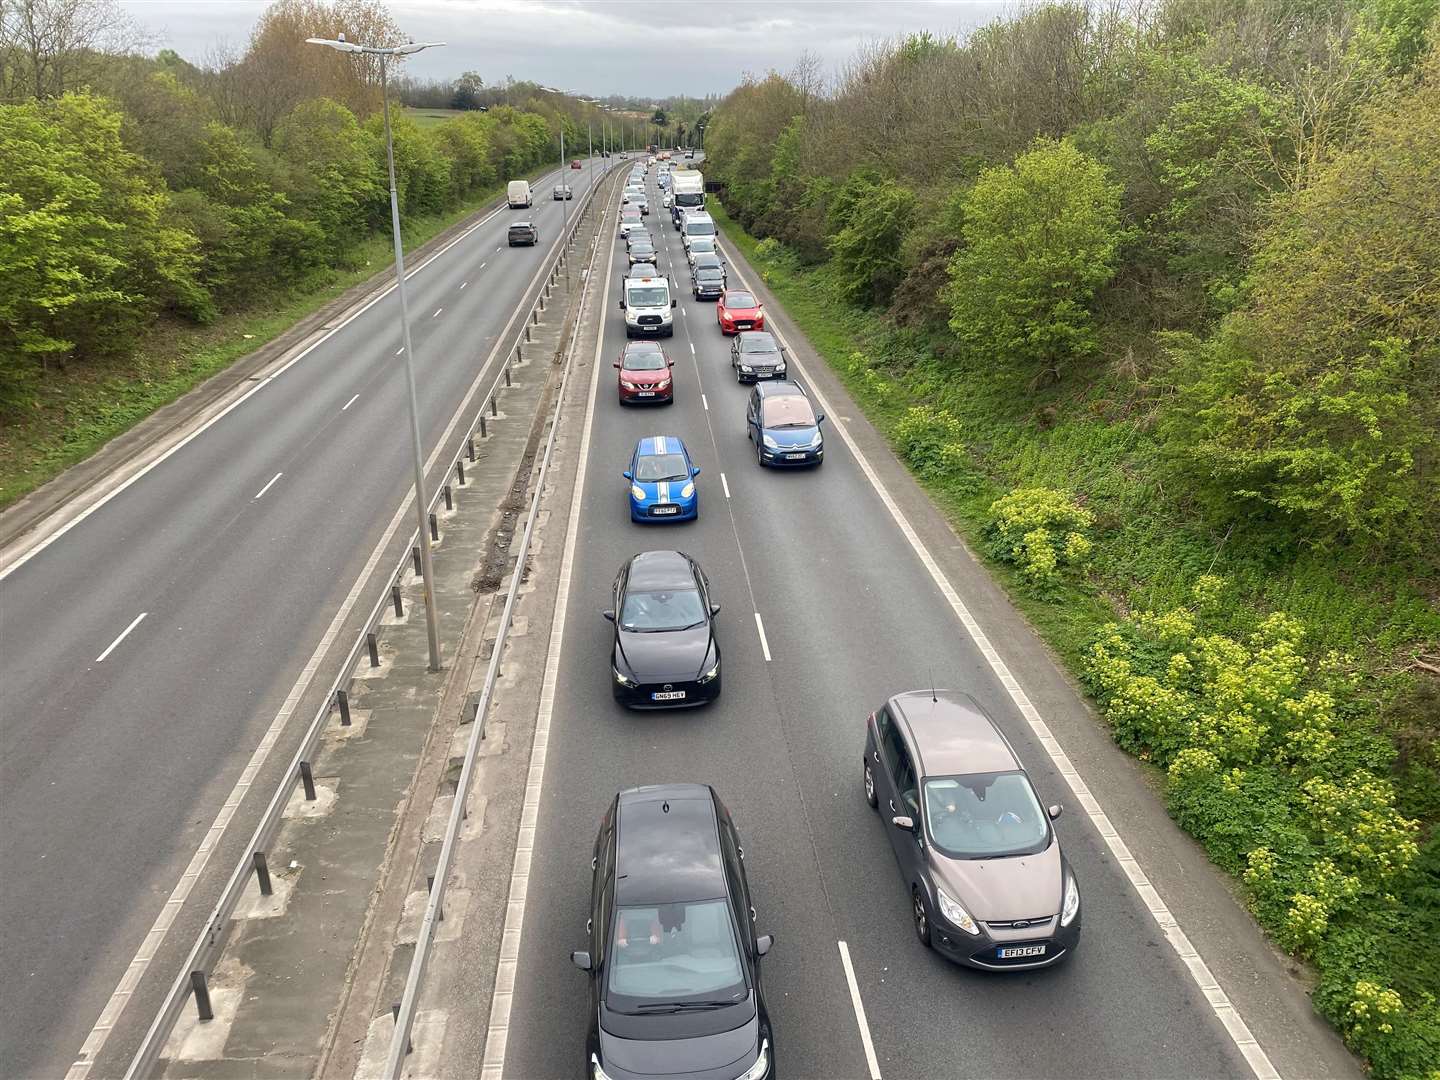 The Thanet Way works have caused frustration among drivers